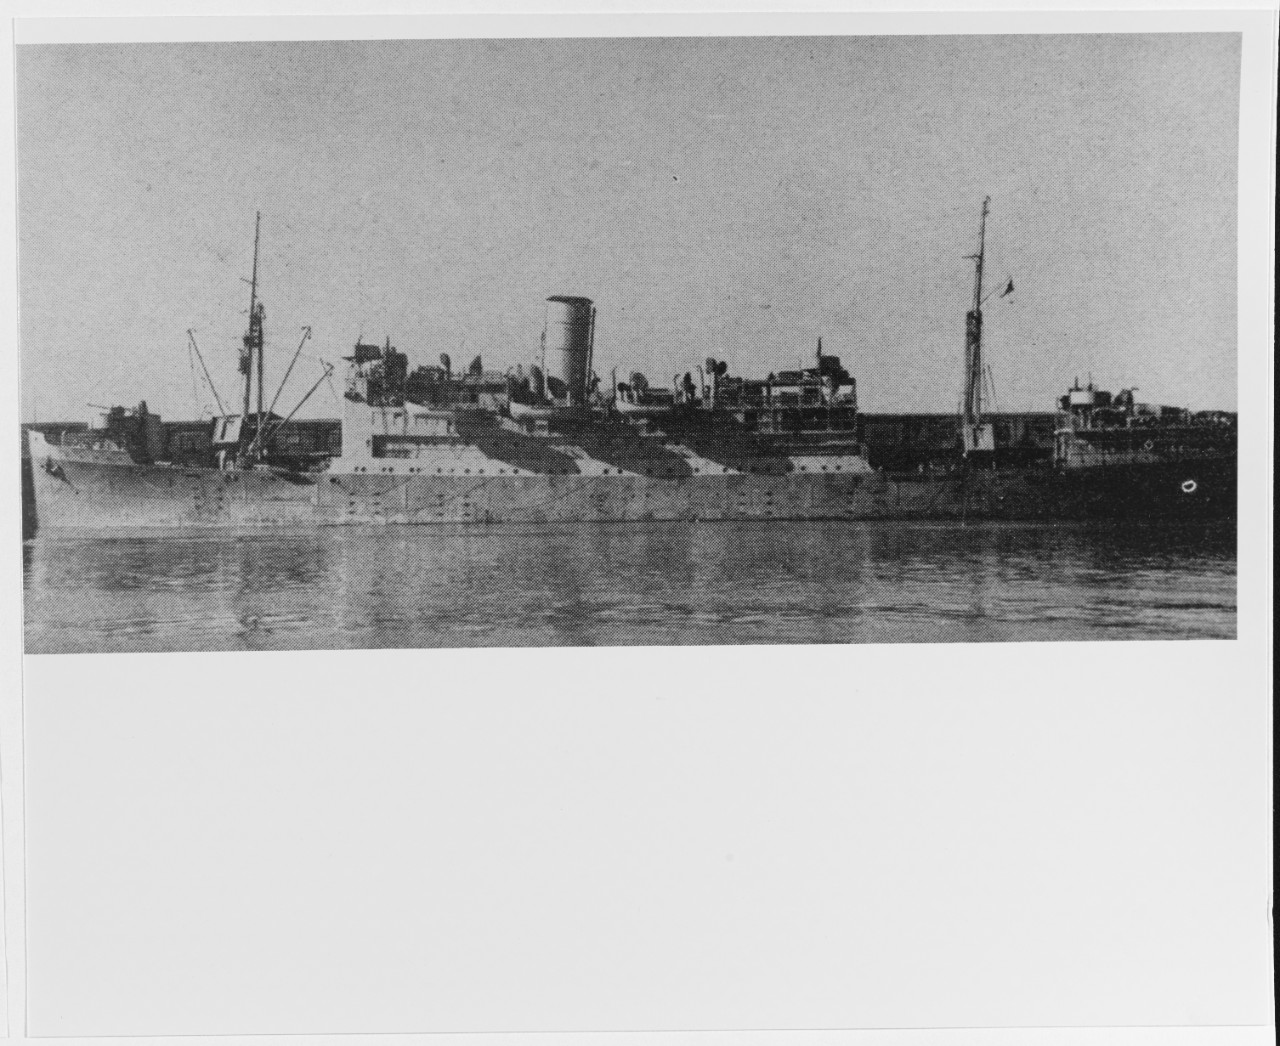 S.S. MEXICO (ex-COLOMBIA)